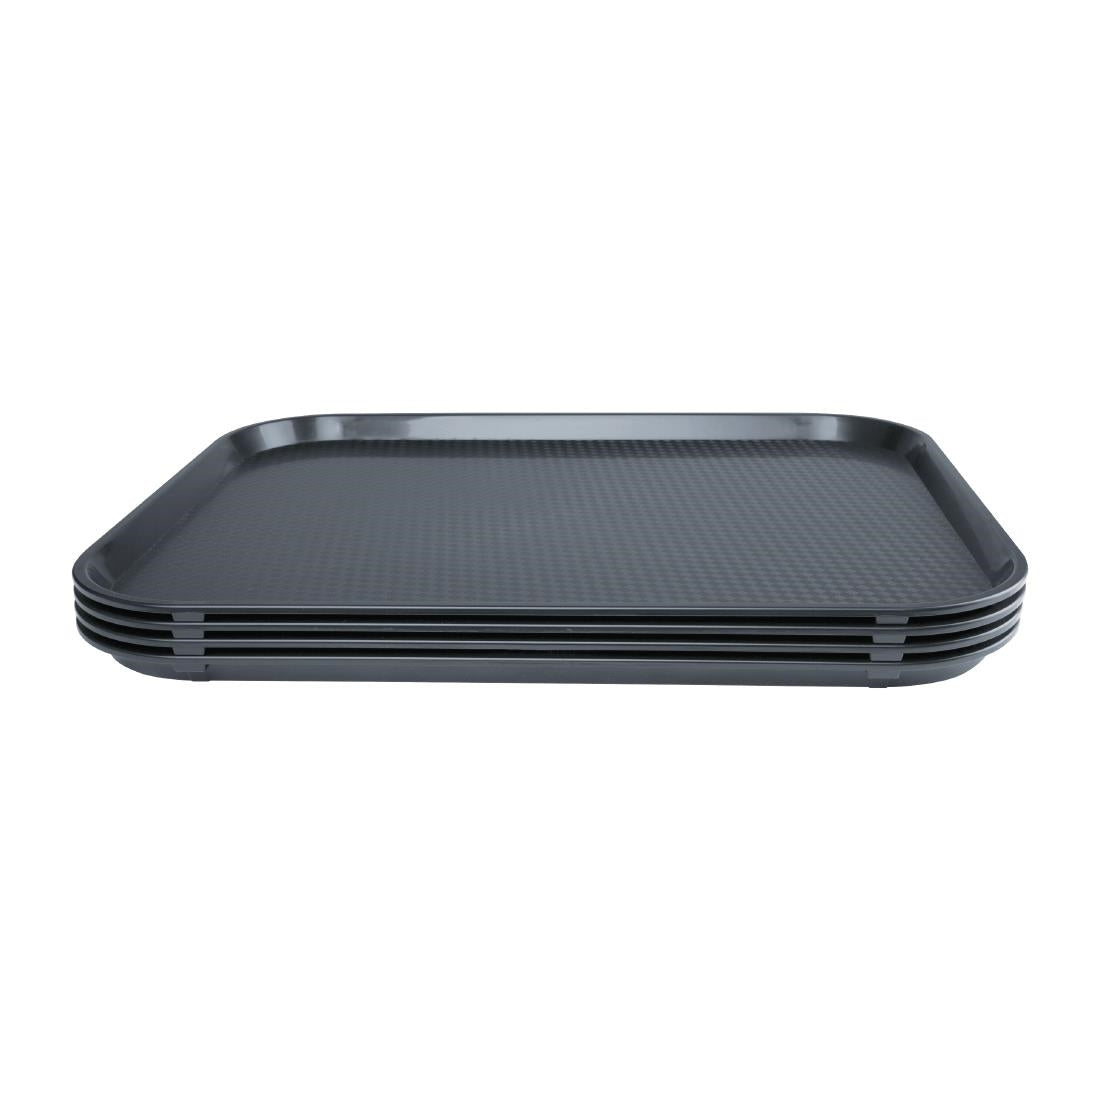 FD938 Kristallon Foodservice Tray Charcoal 350 x 450mm JD Catering Equipment Solutions Ltd